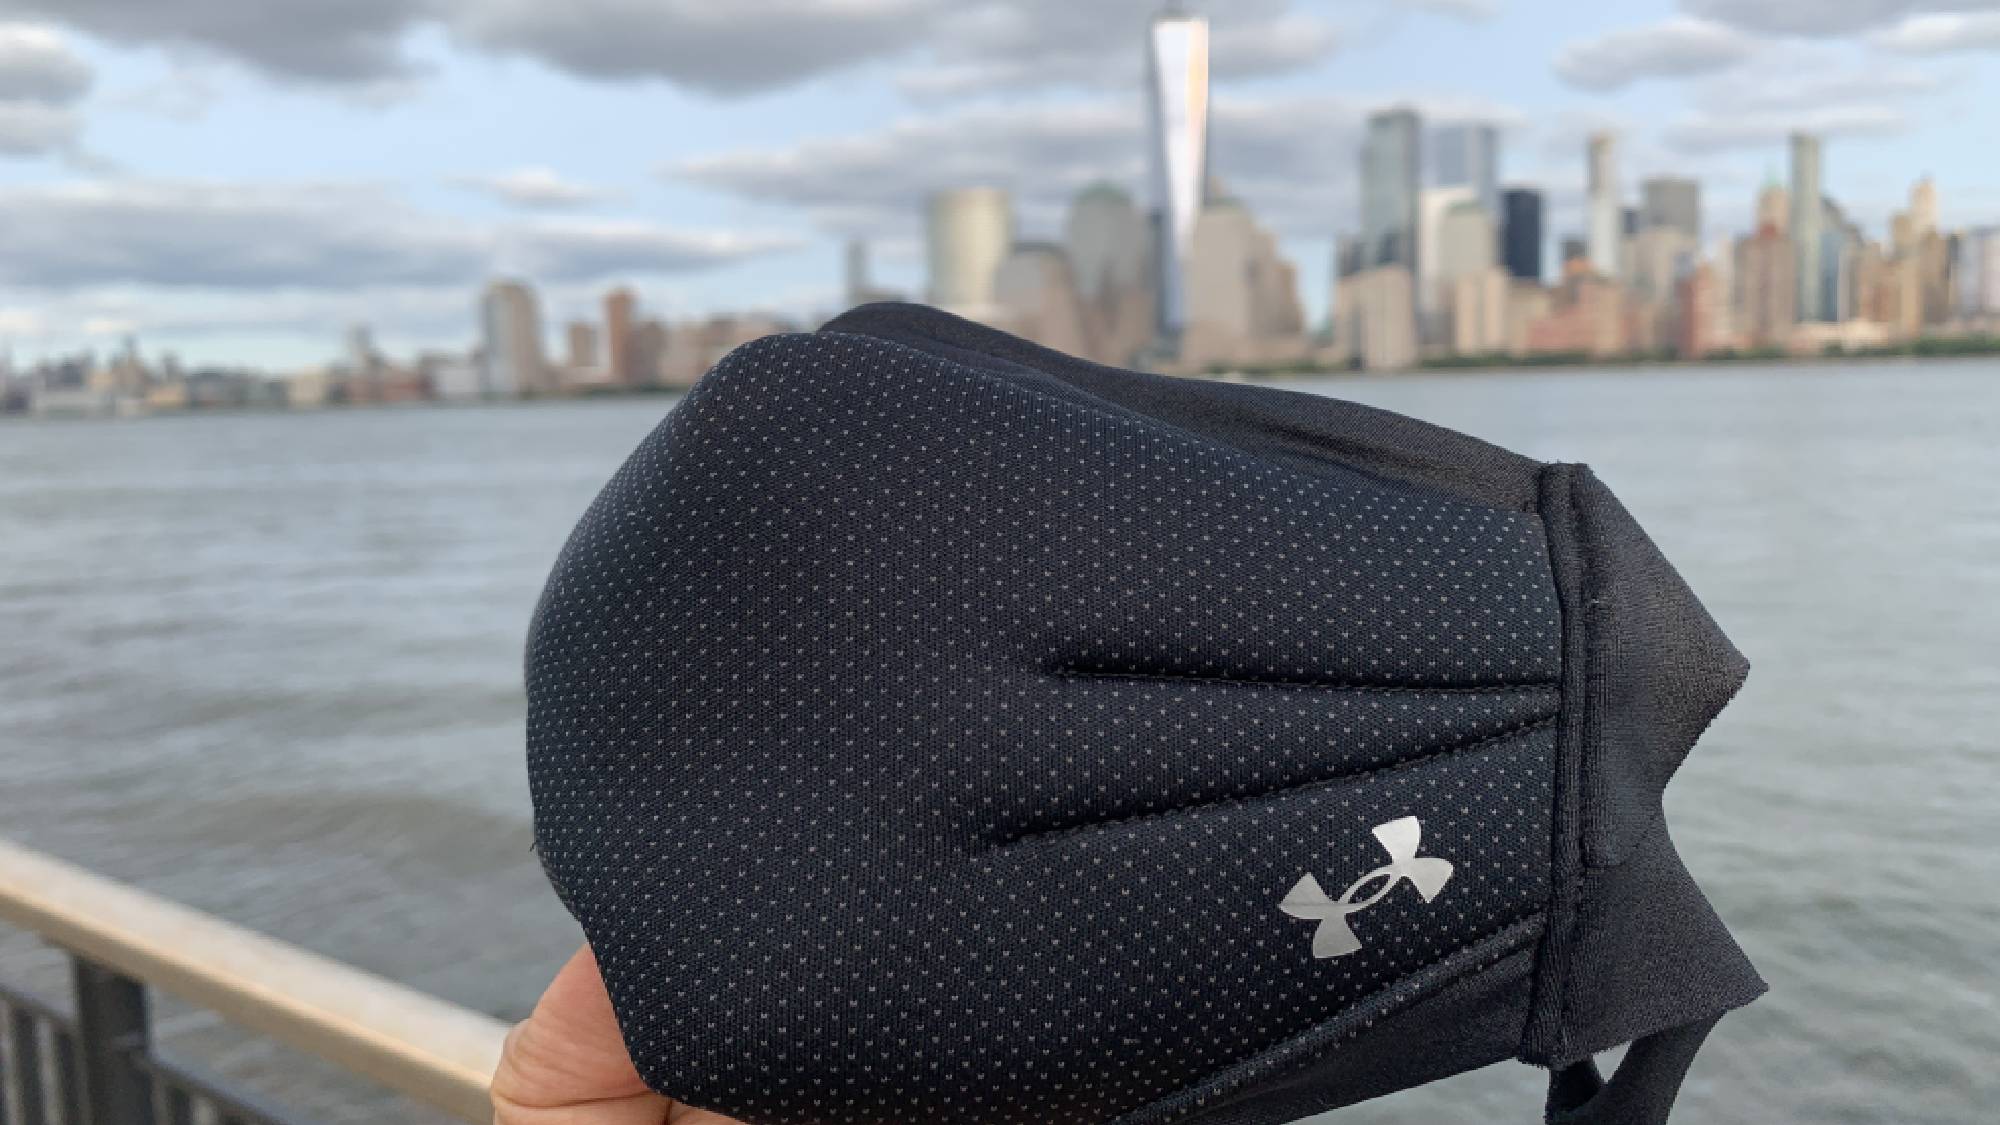 Under Armour Just Released a Face Mask That's Made For Running & Working Out